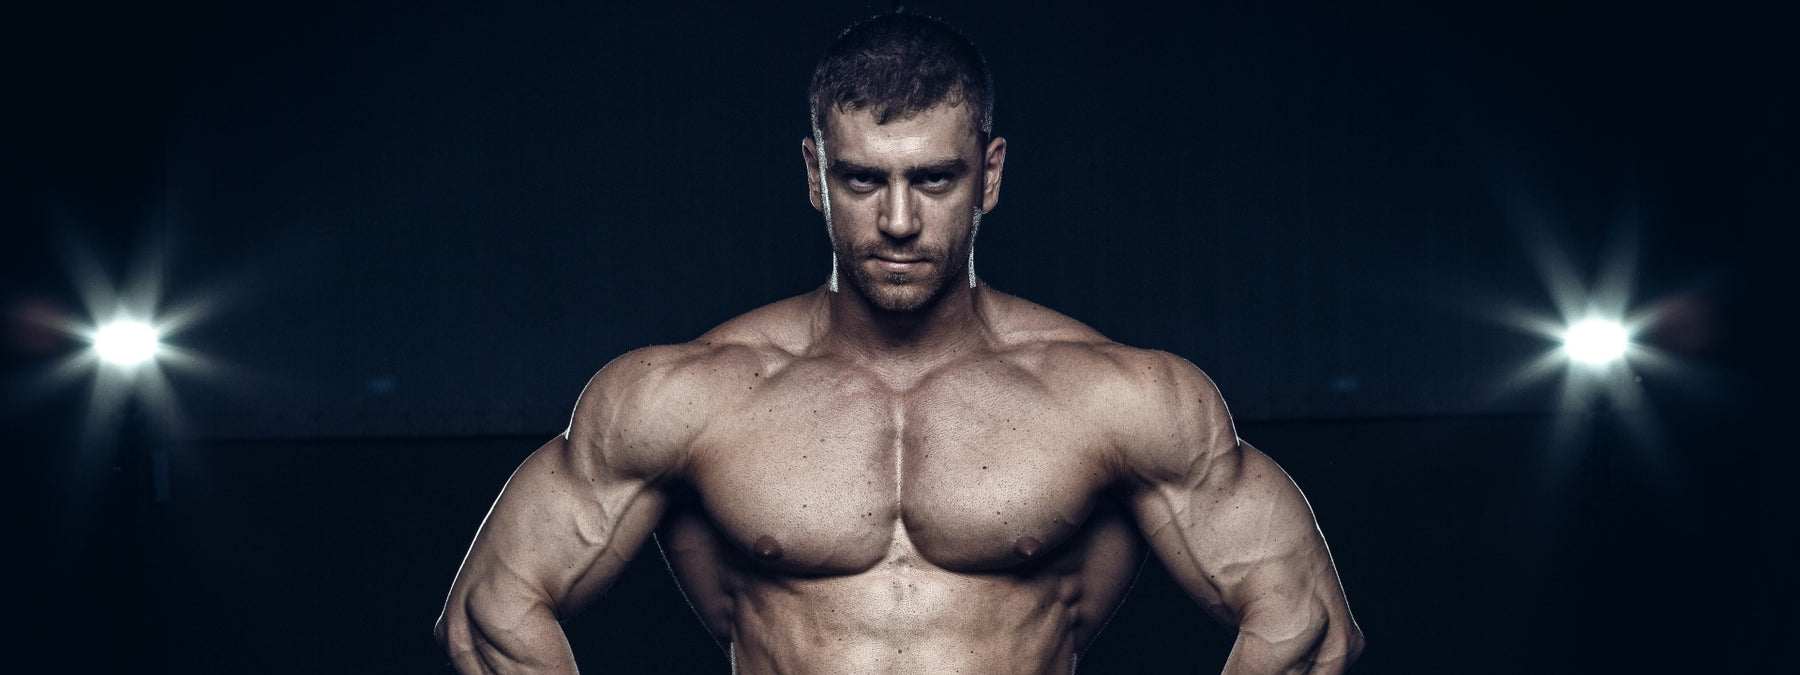 Power, Pain, Pump - The 3P Chest Workout Routine